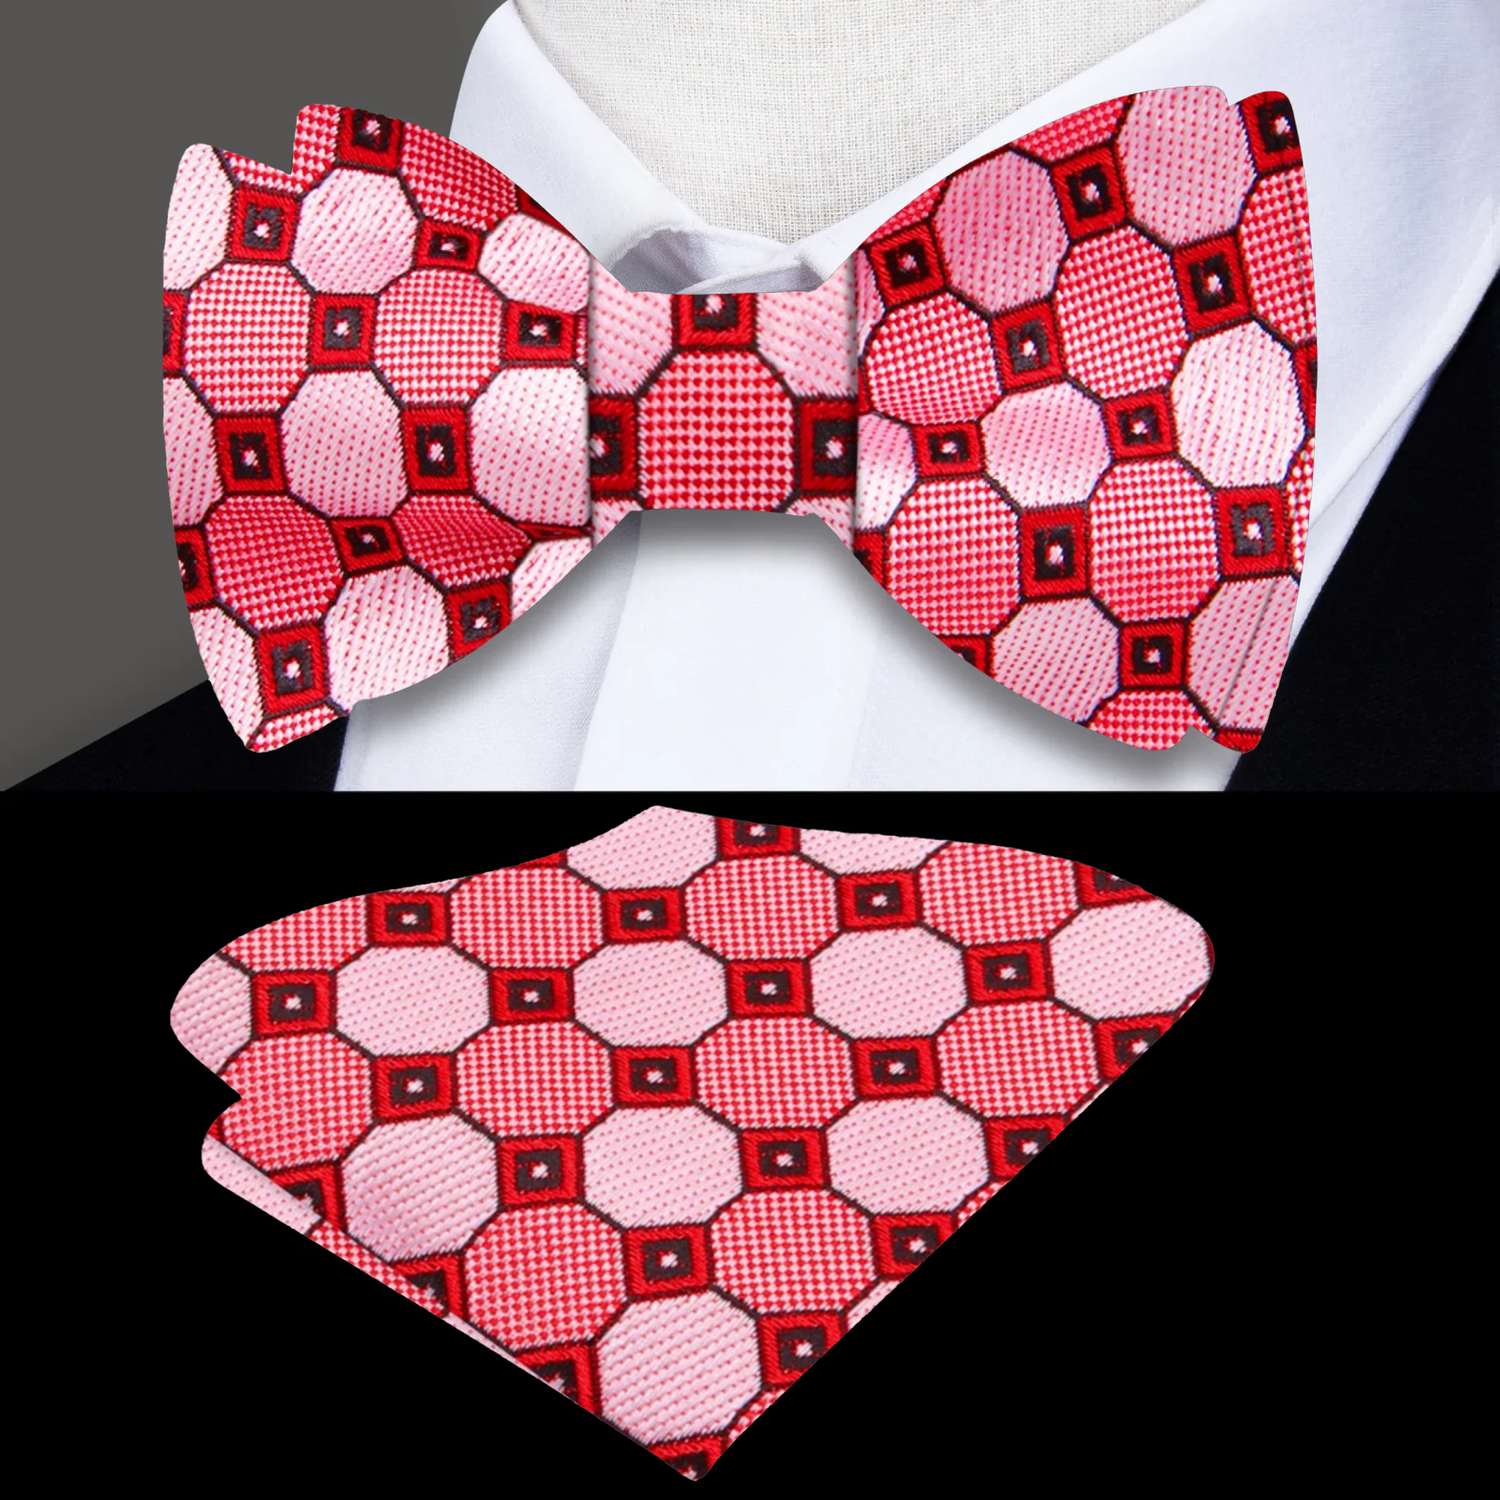 A Red, Pink Geometric Pattern Silk Self Tie Bow Tie, Matching Pocket Square